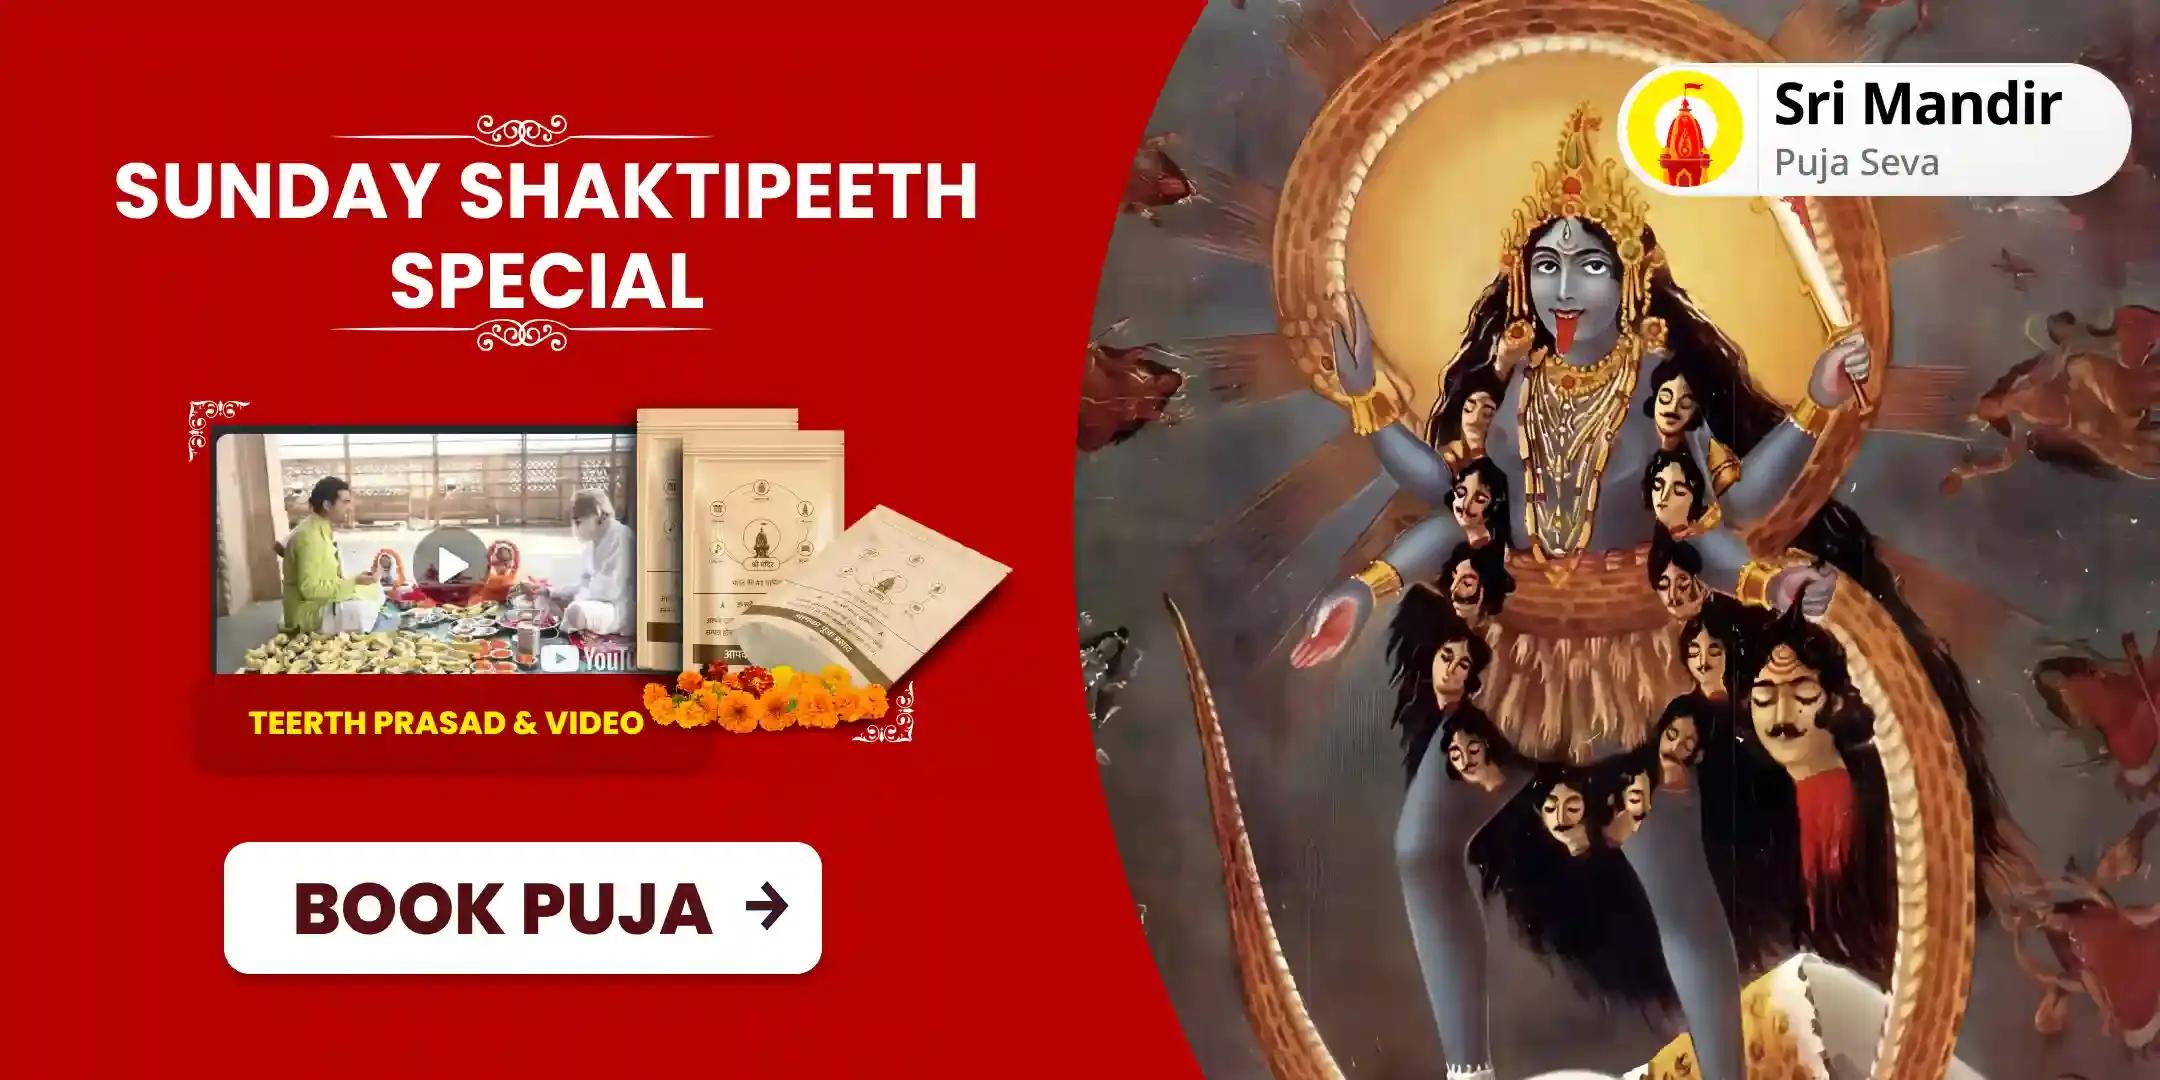 Sunday Shaktipeeth Special Maa Kali Tantra Yukta Yagya for Protection against Negative Energies, Evil Forces and Protection from Fear